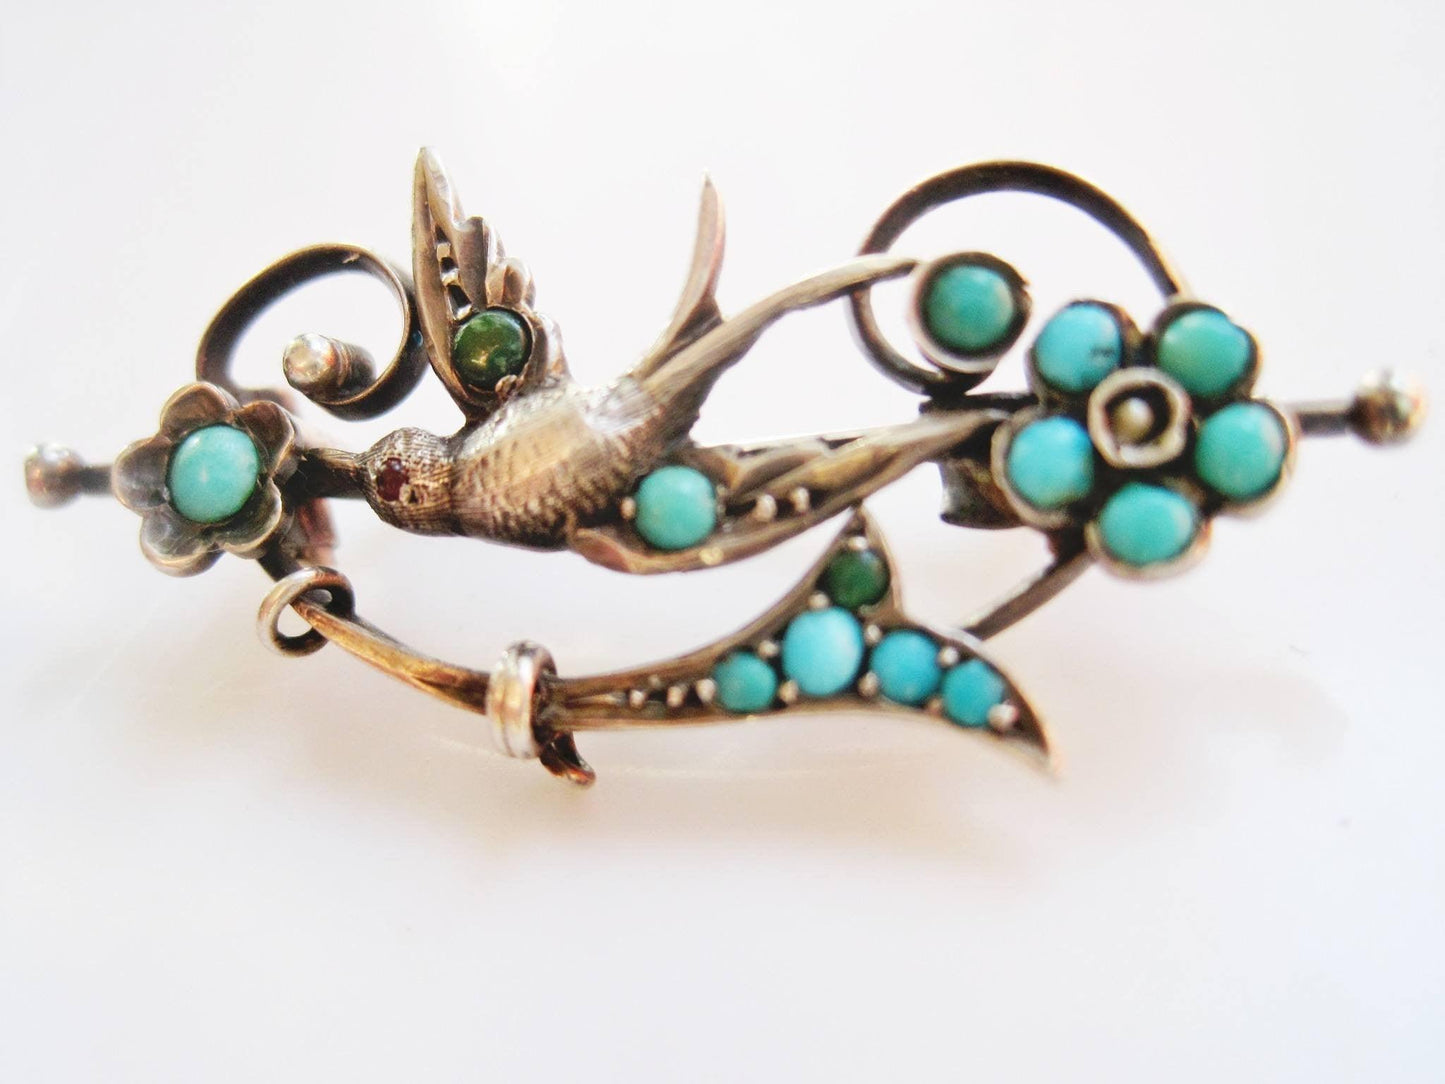 Antique Victorian Silver and Turquoise Swallow Bird Brooch or Pin - Anteeka